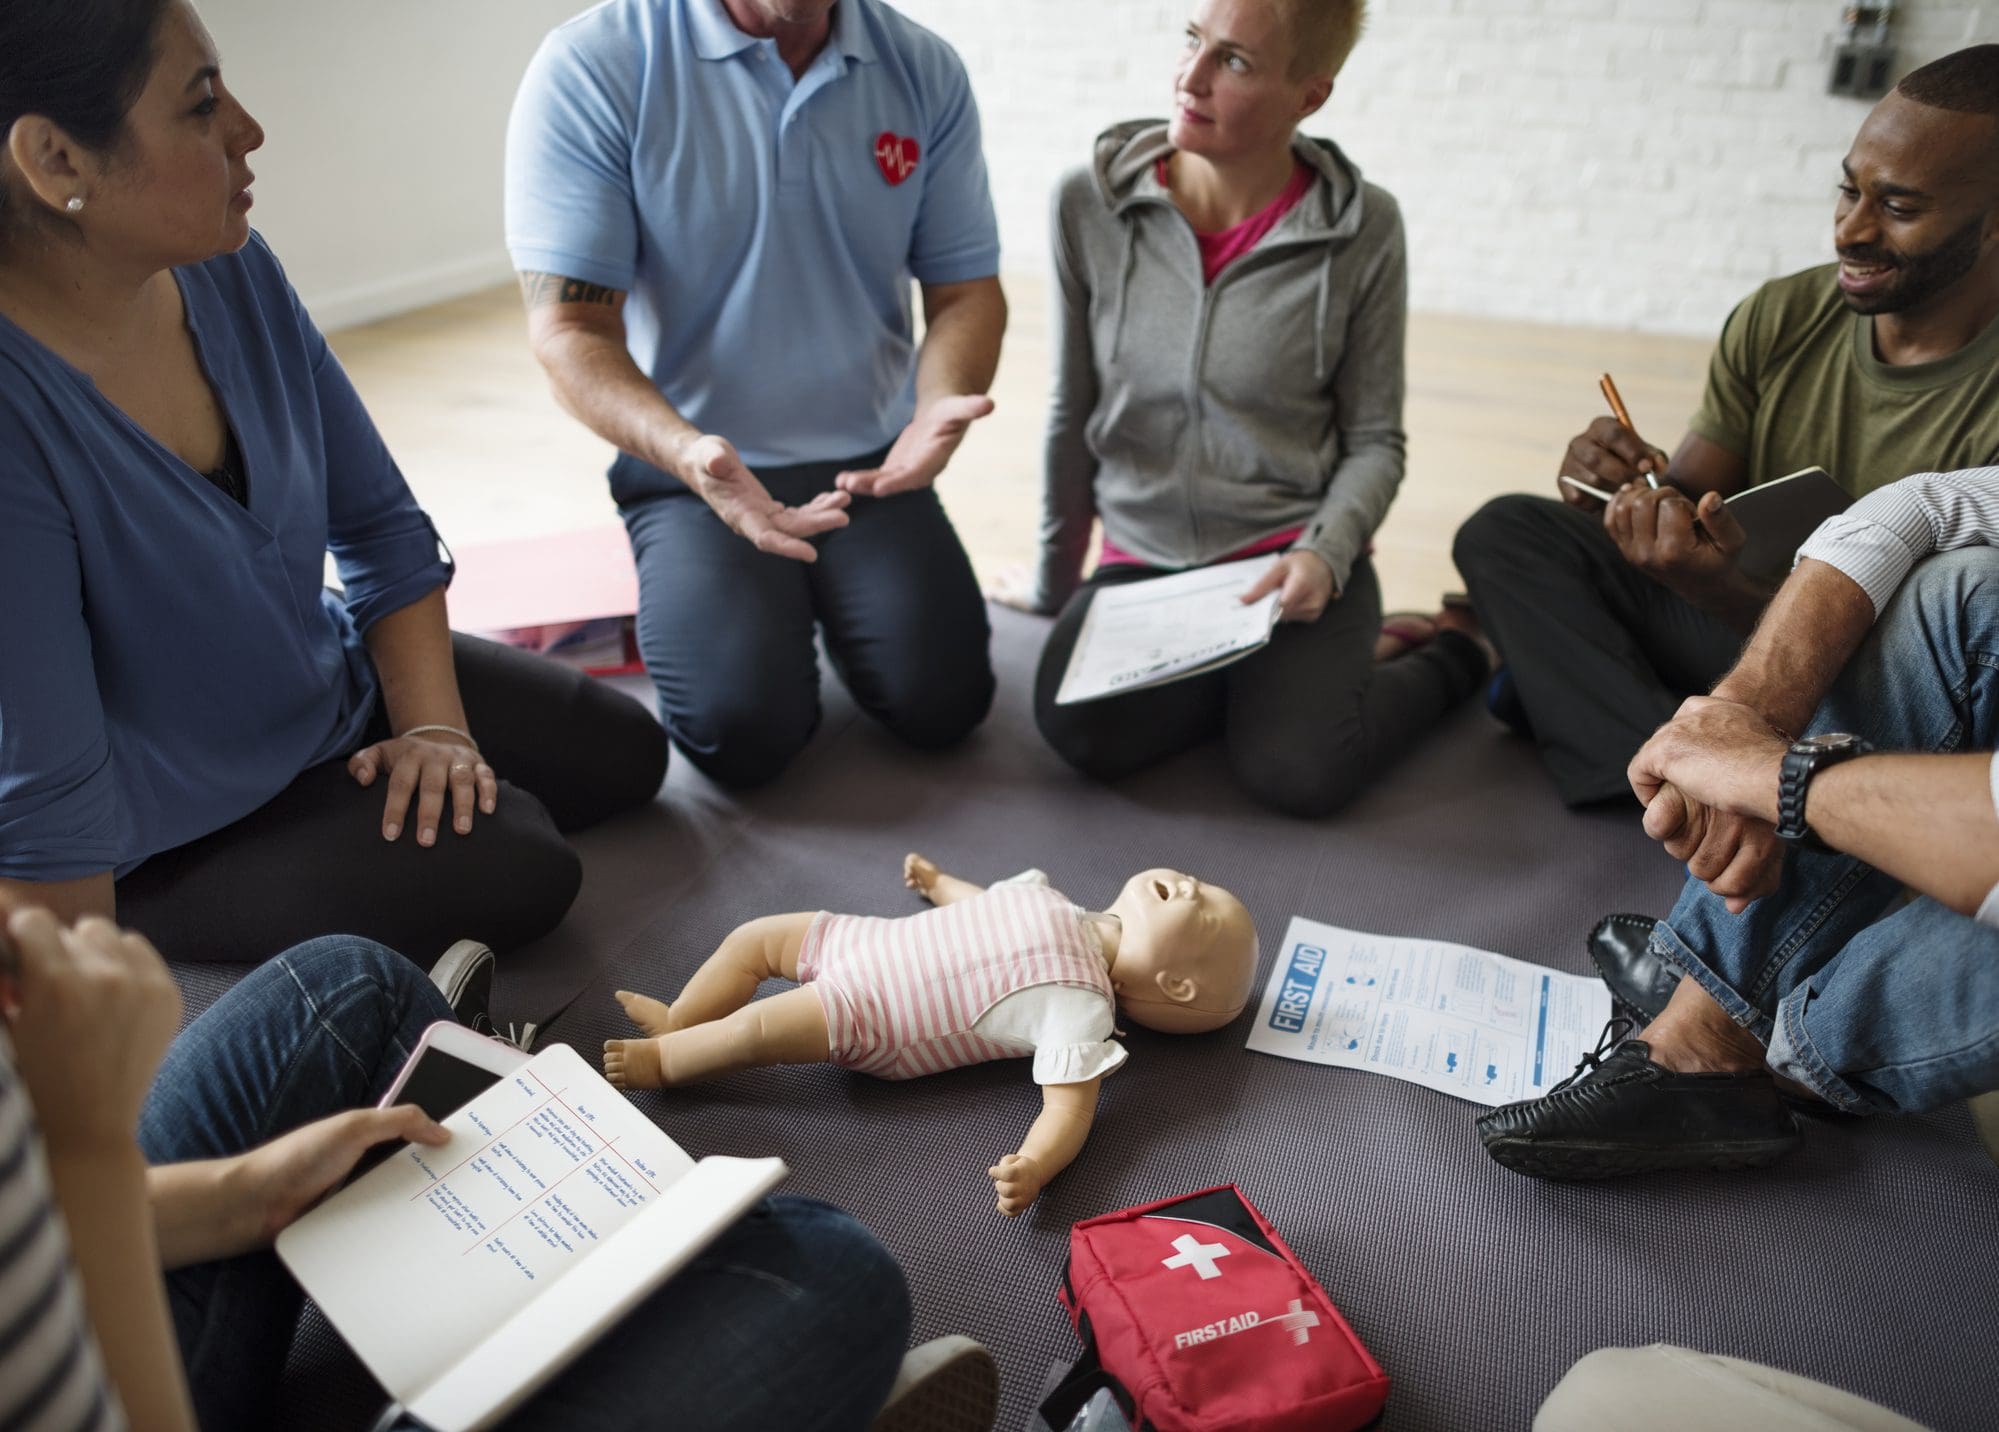 Our Launceston, Toowoomba and Sunshine Coast offices specialise in corporate first aid, CPR and LVR training.